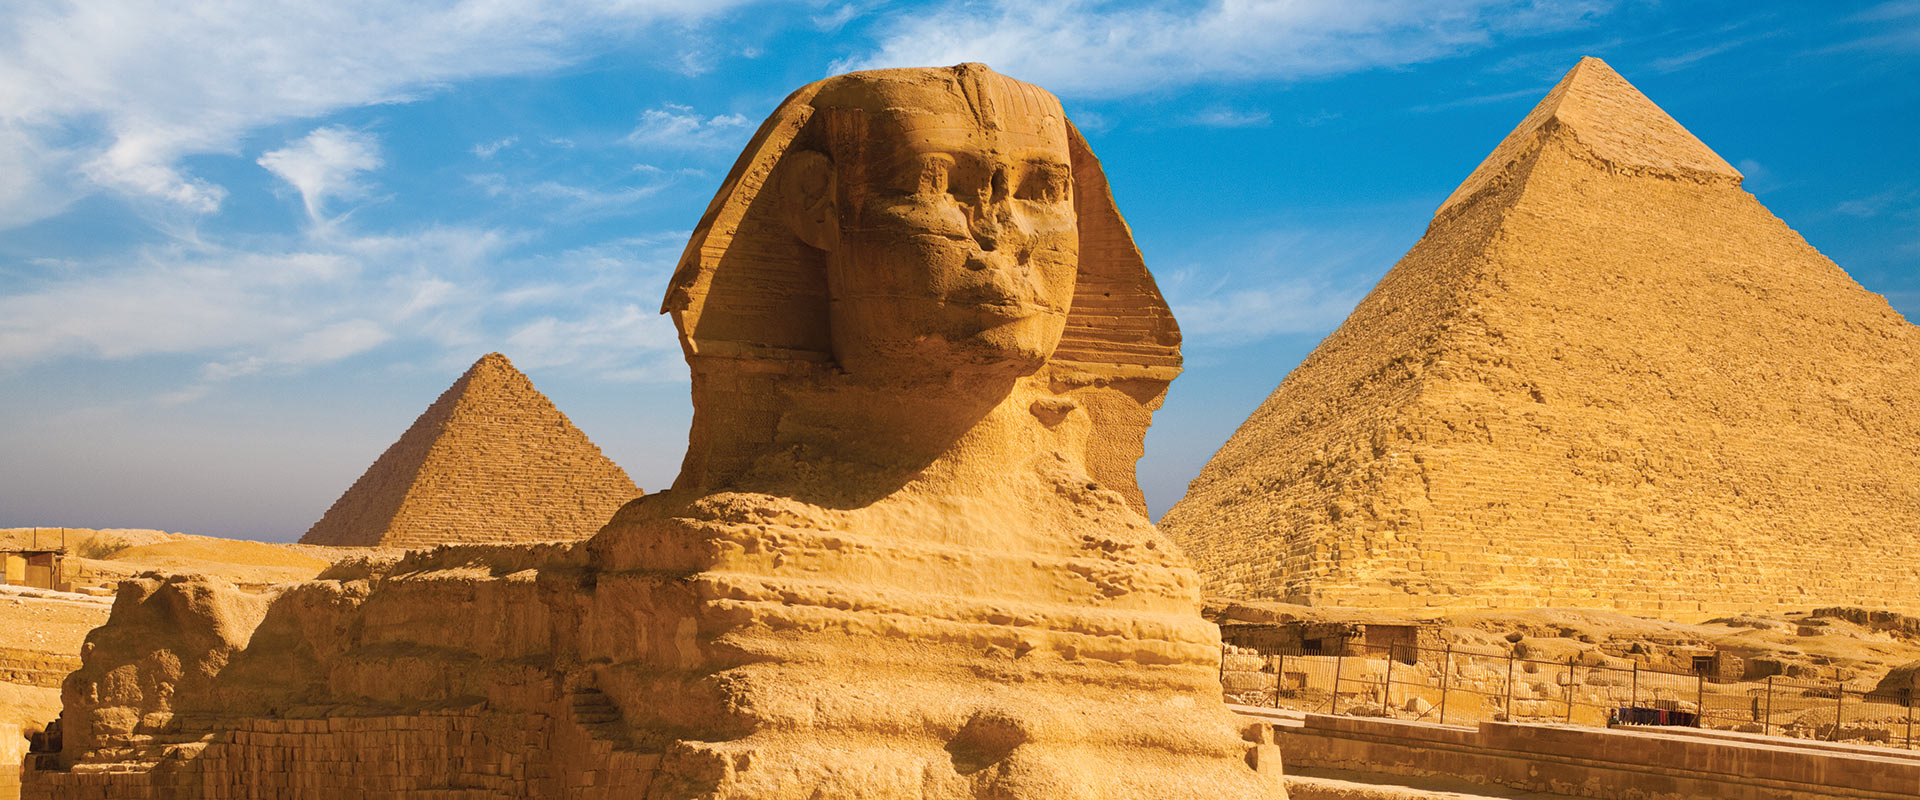 Ancient pyramids and Sphinx, Egypt